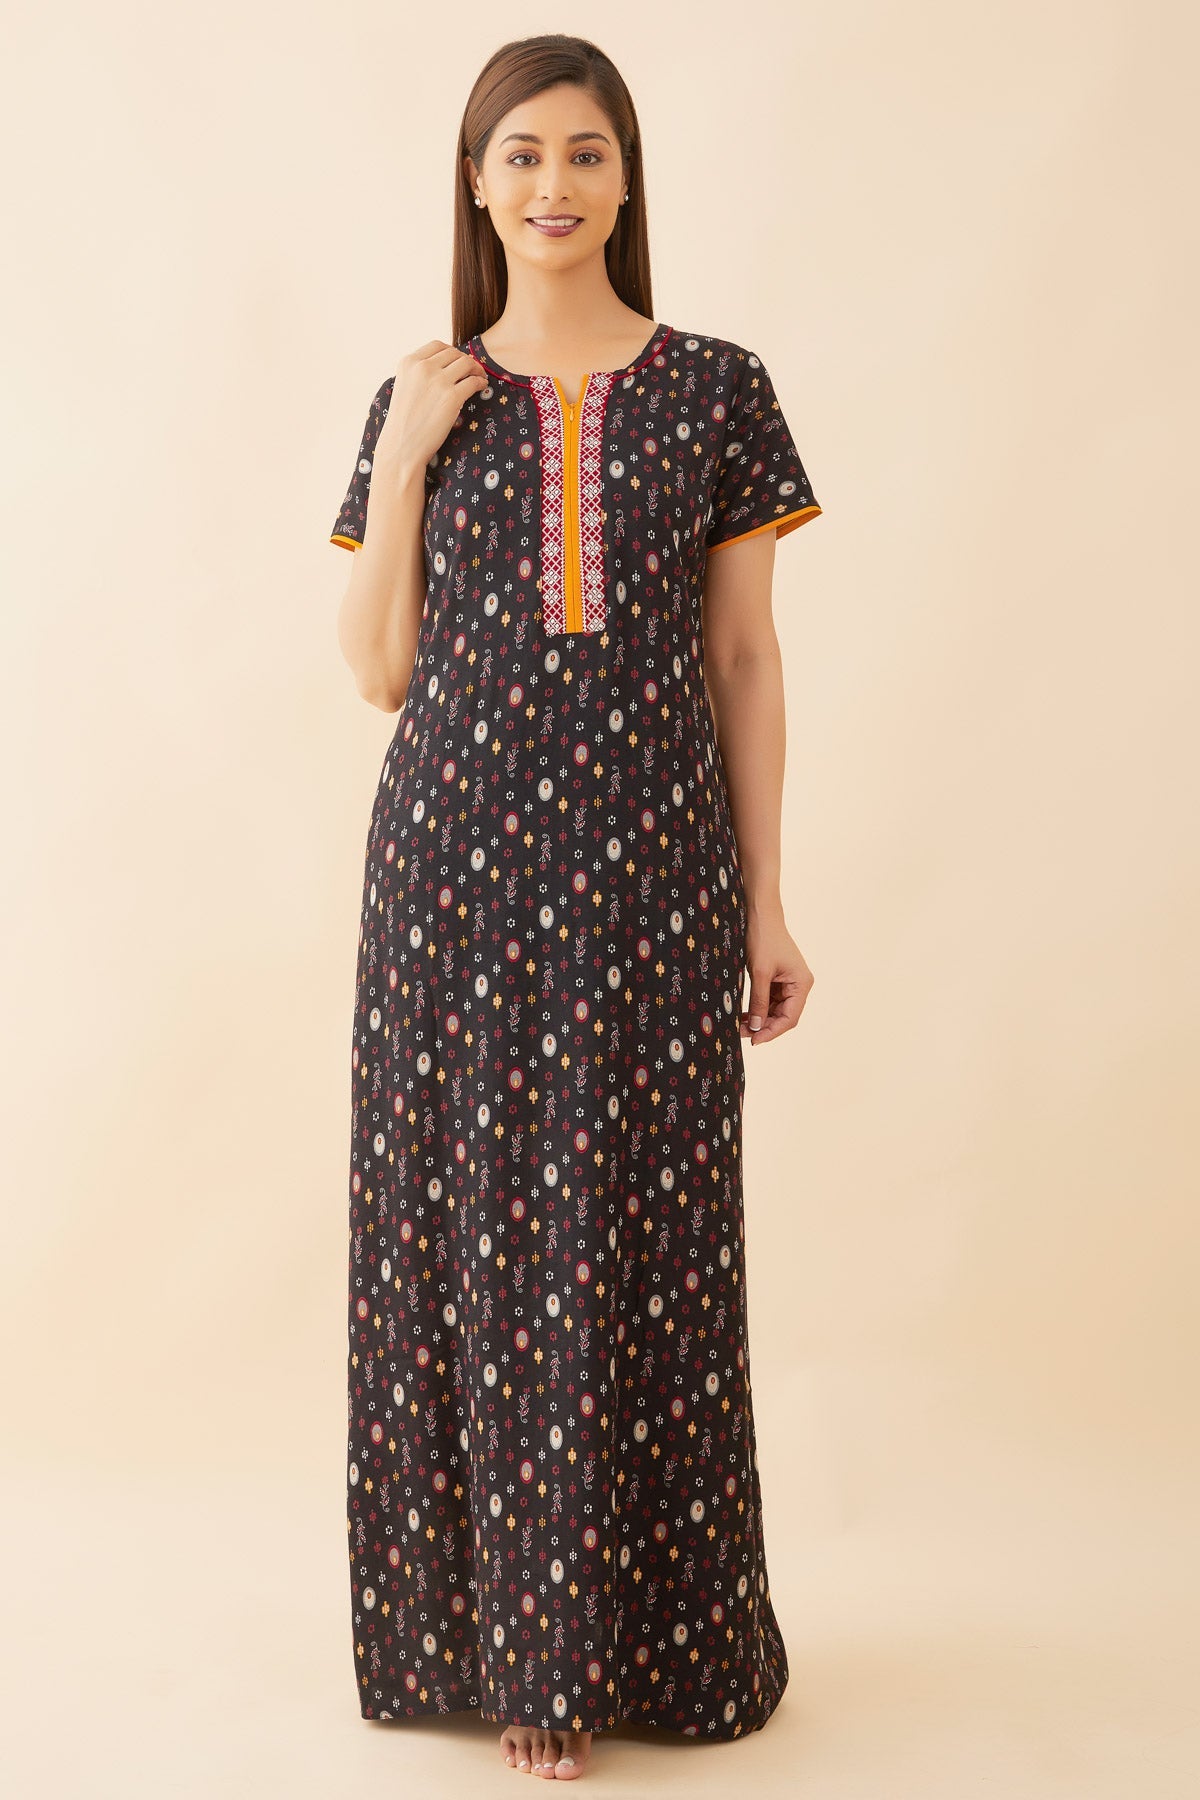 All Over Geometric Print With Contrast Embroidered Yoke Nighty - Black